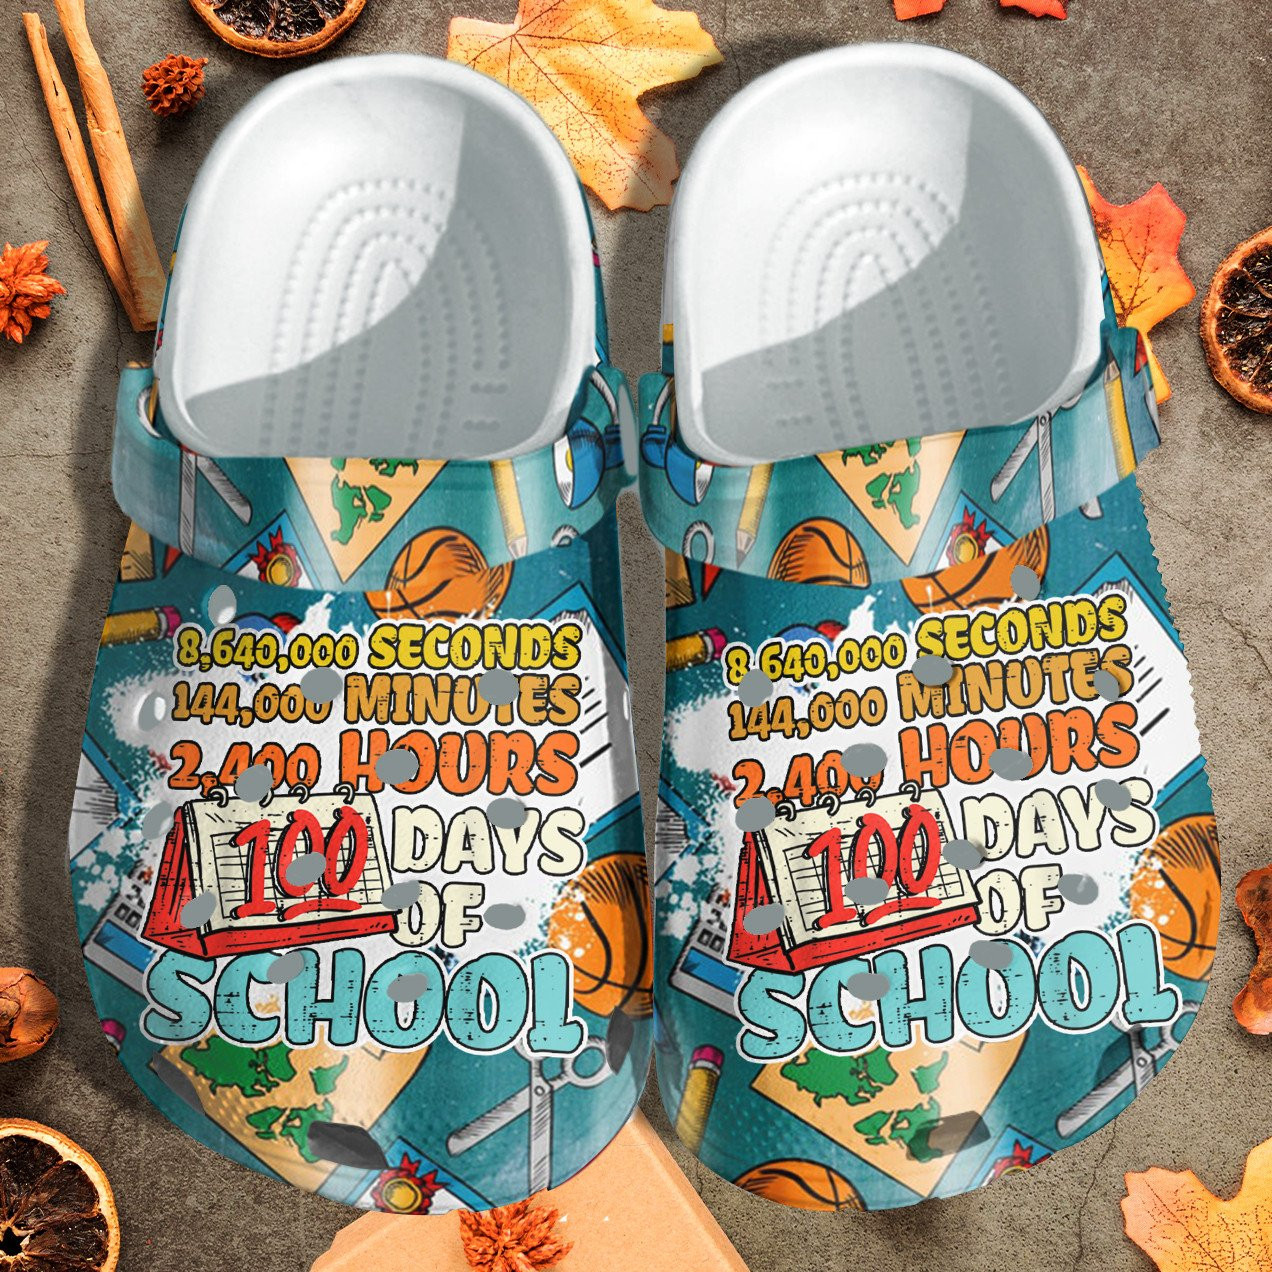 2400 Hours 100 Days Of Schoolleopard Shoes Crocs Crocbland Clog Gift